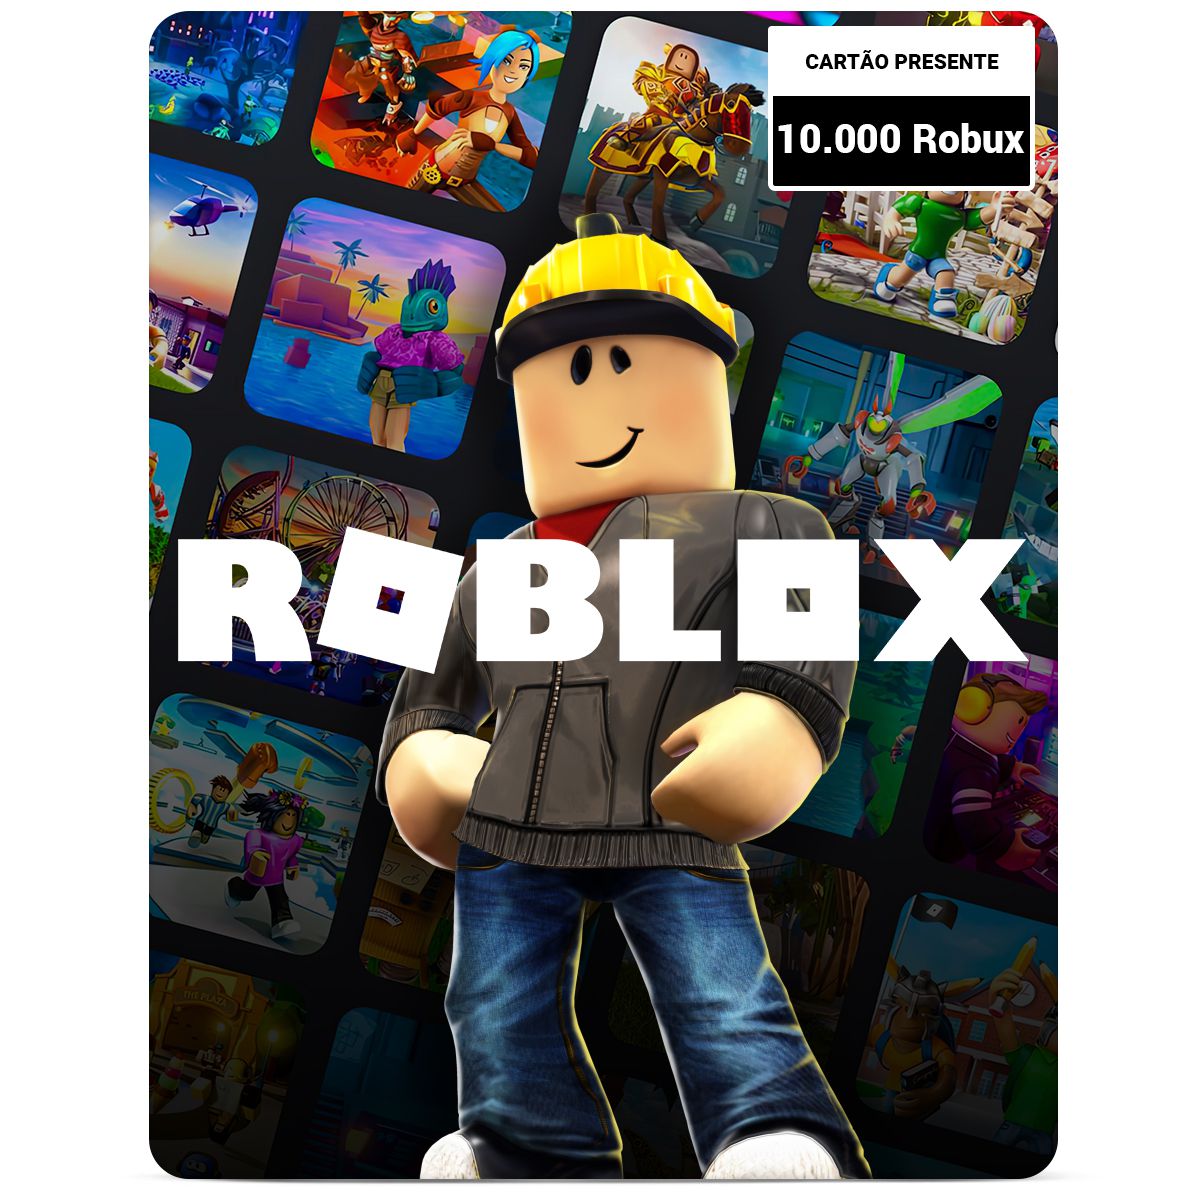 2023* How to get free robux: 1 Code =10,000 Robux (free robux